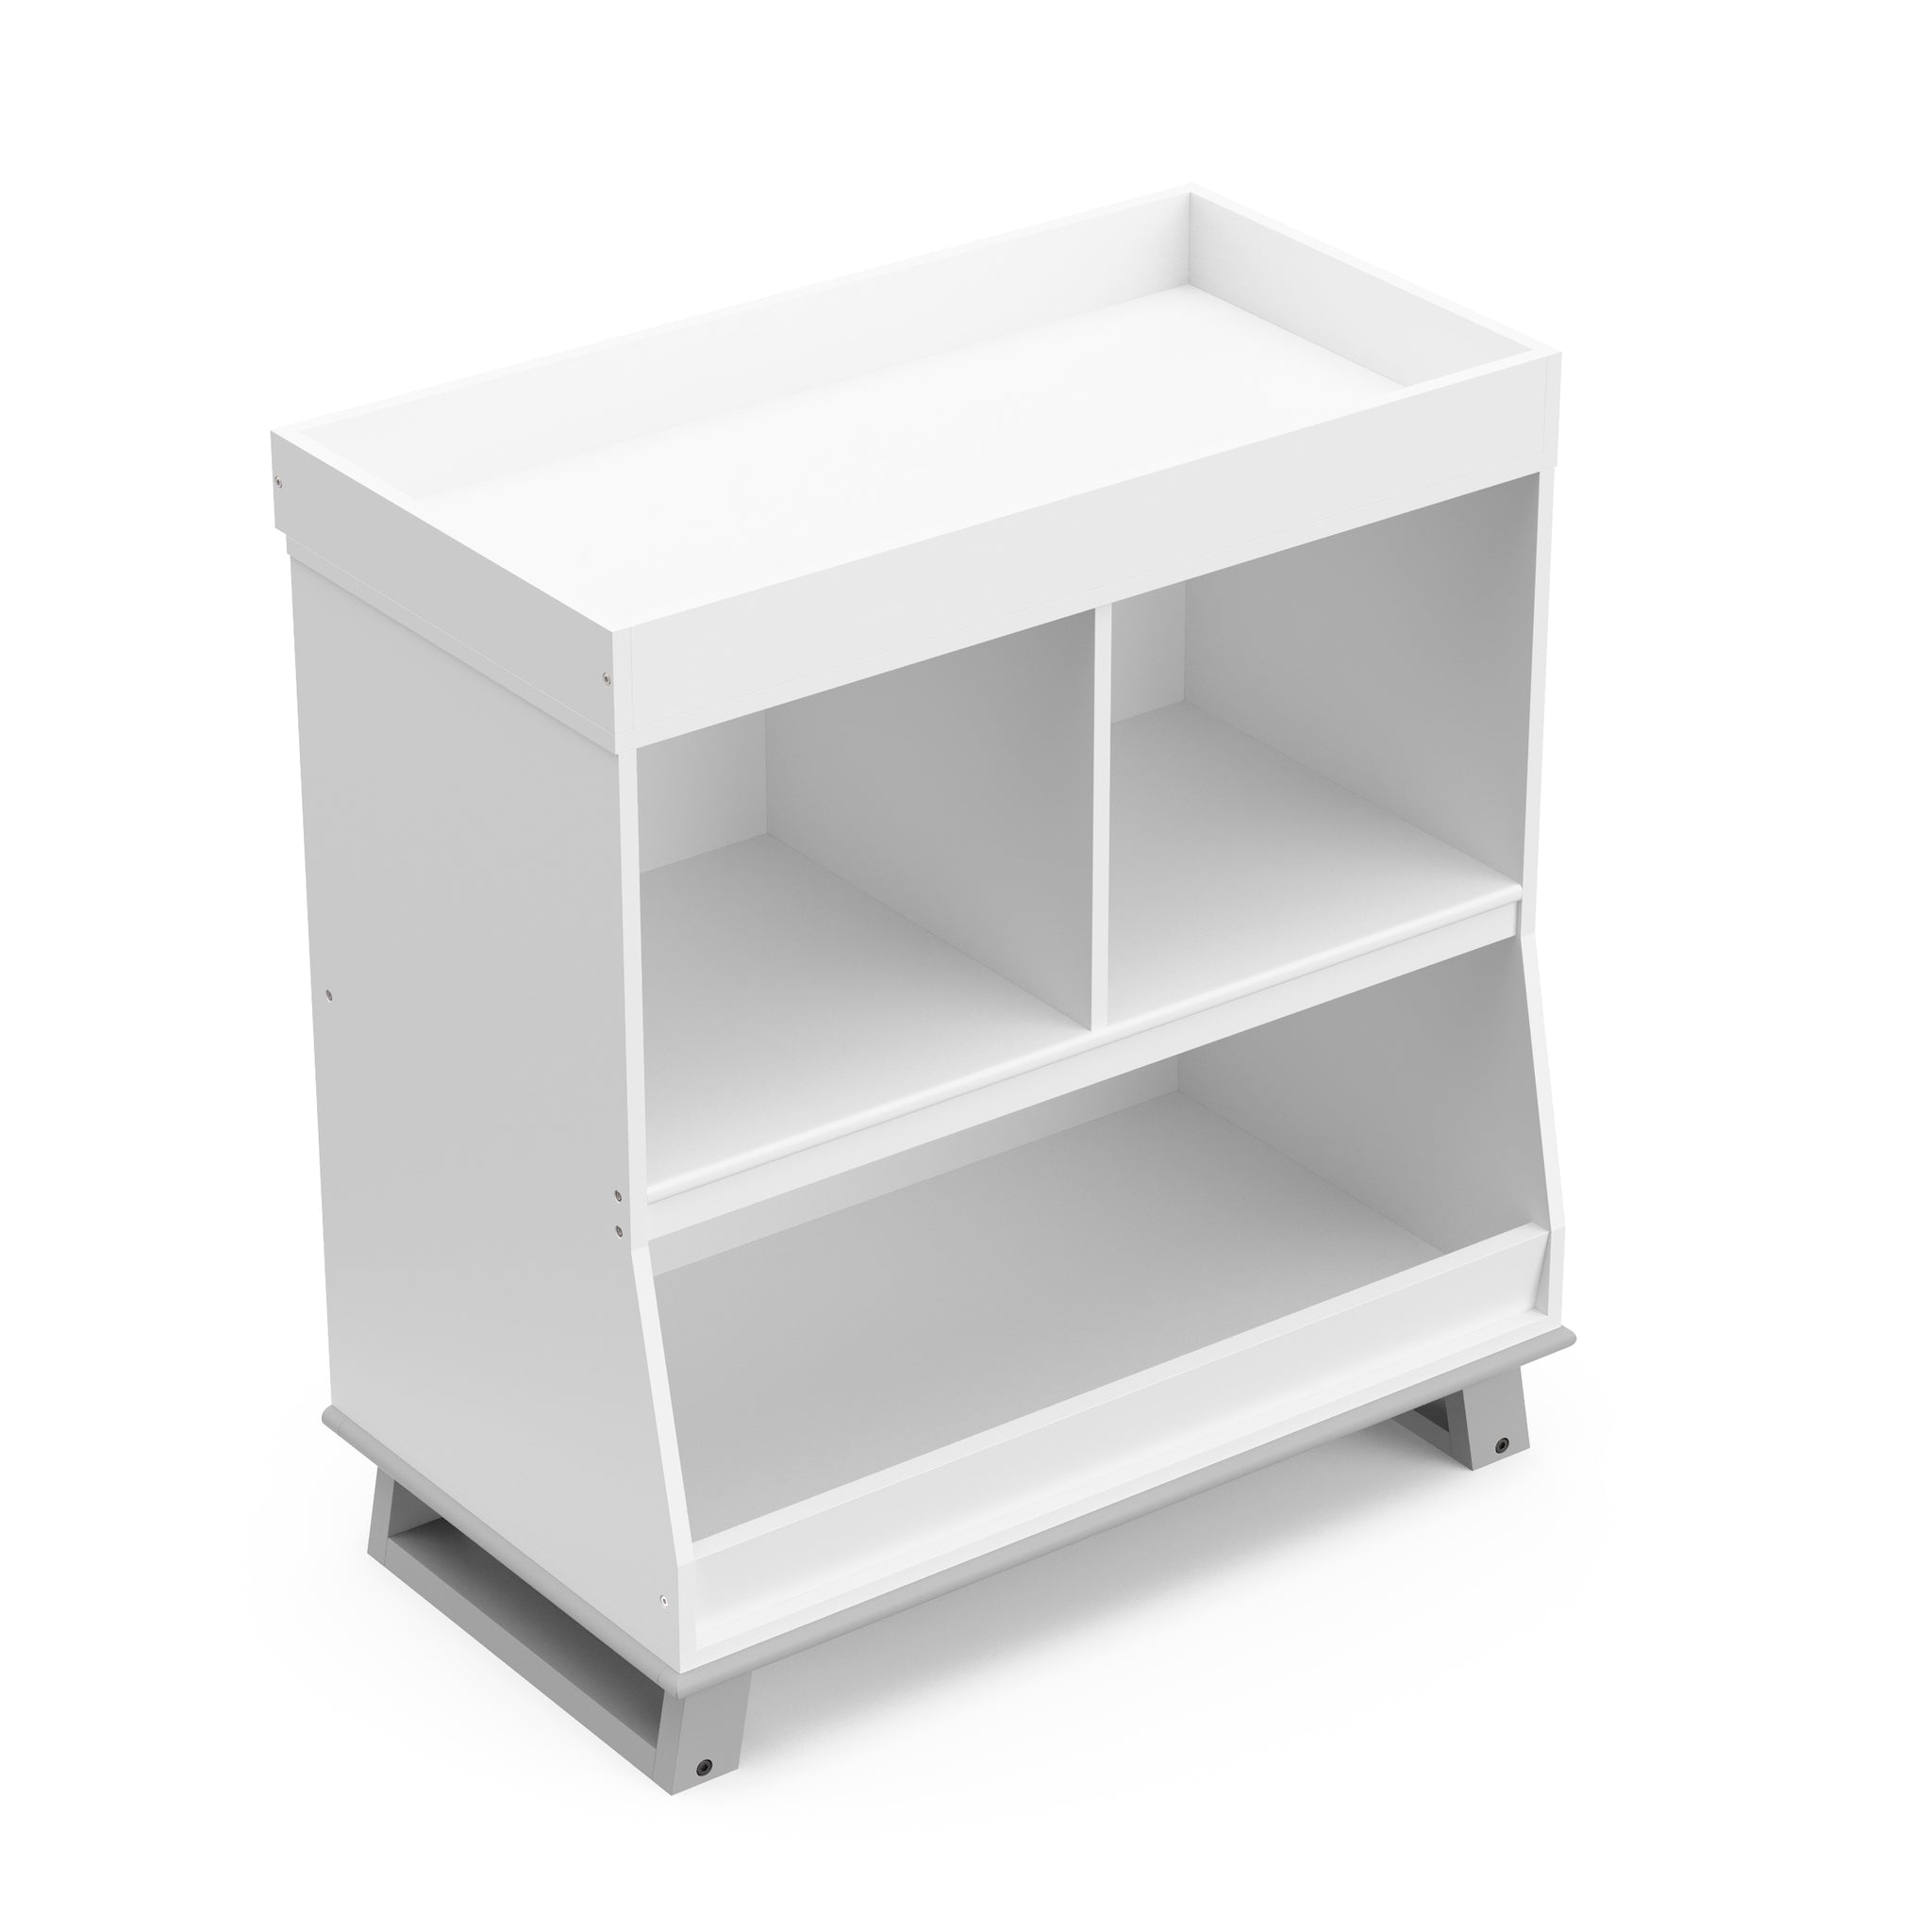 Pebble gray angled changing table with storage